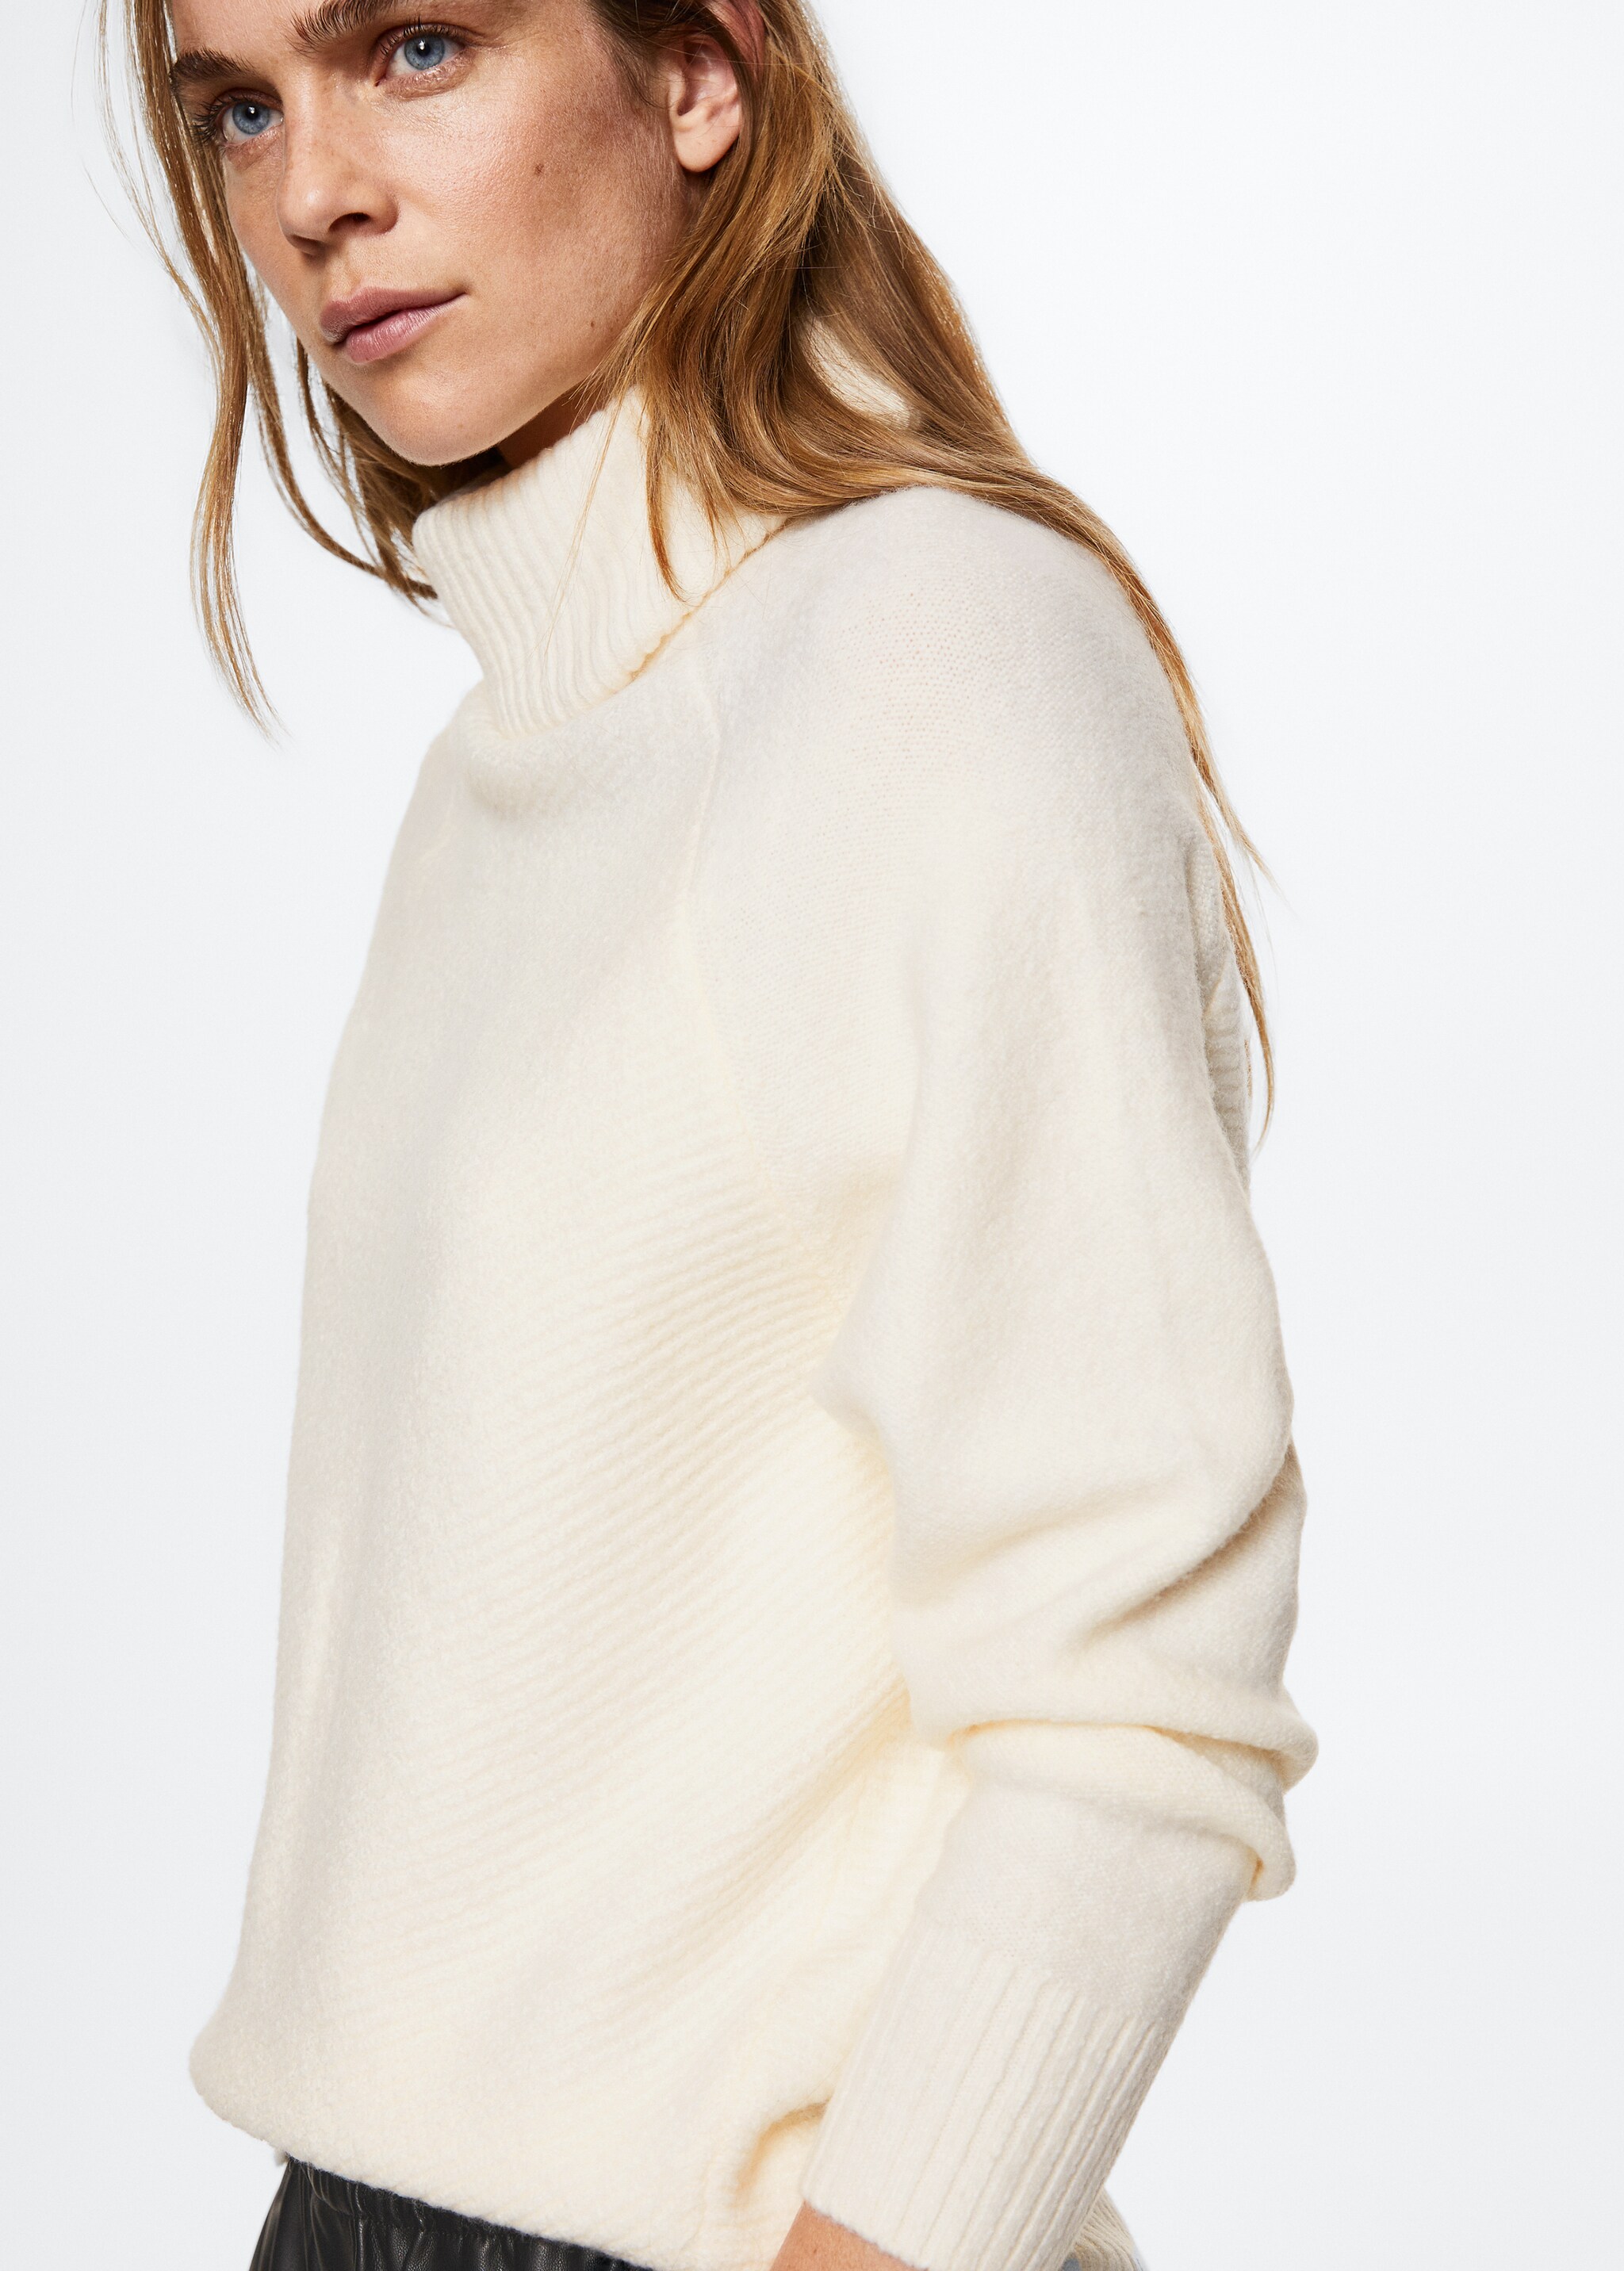 Turtle neck sweater - Details of the article 4